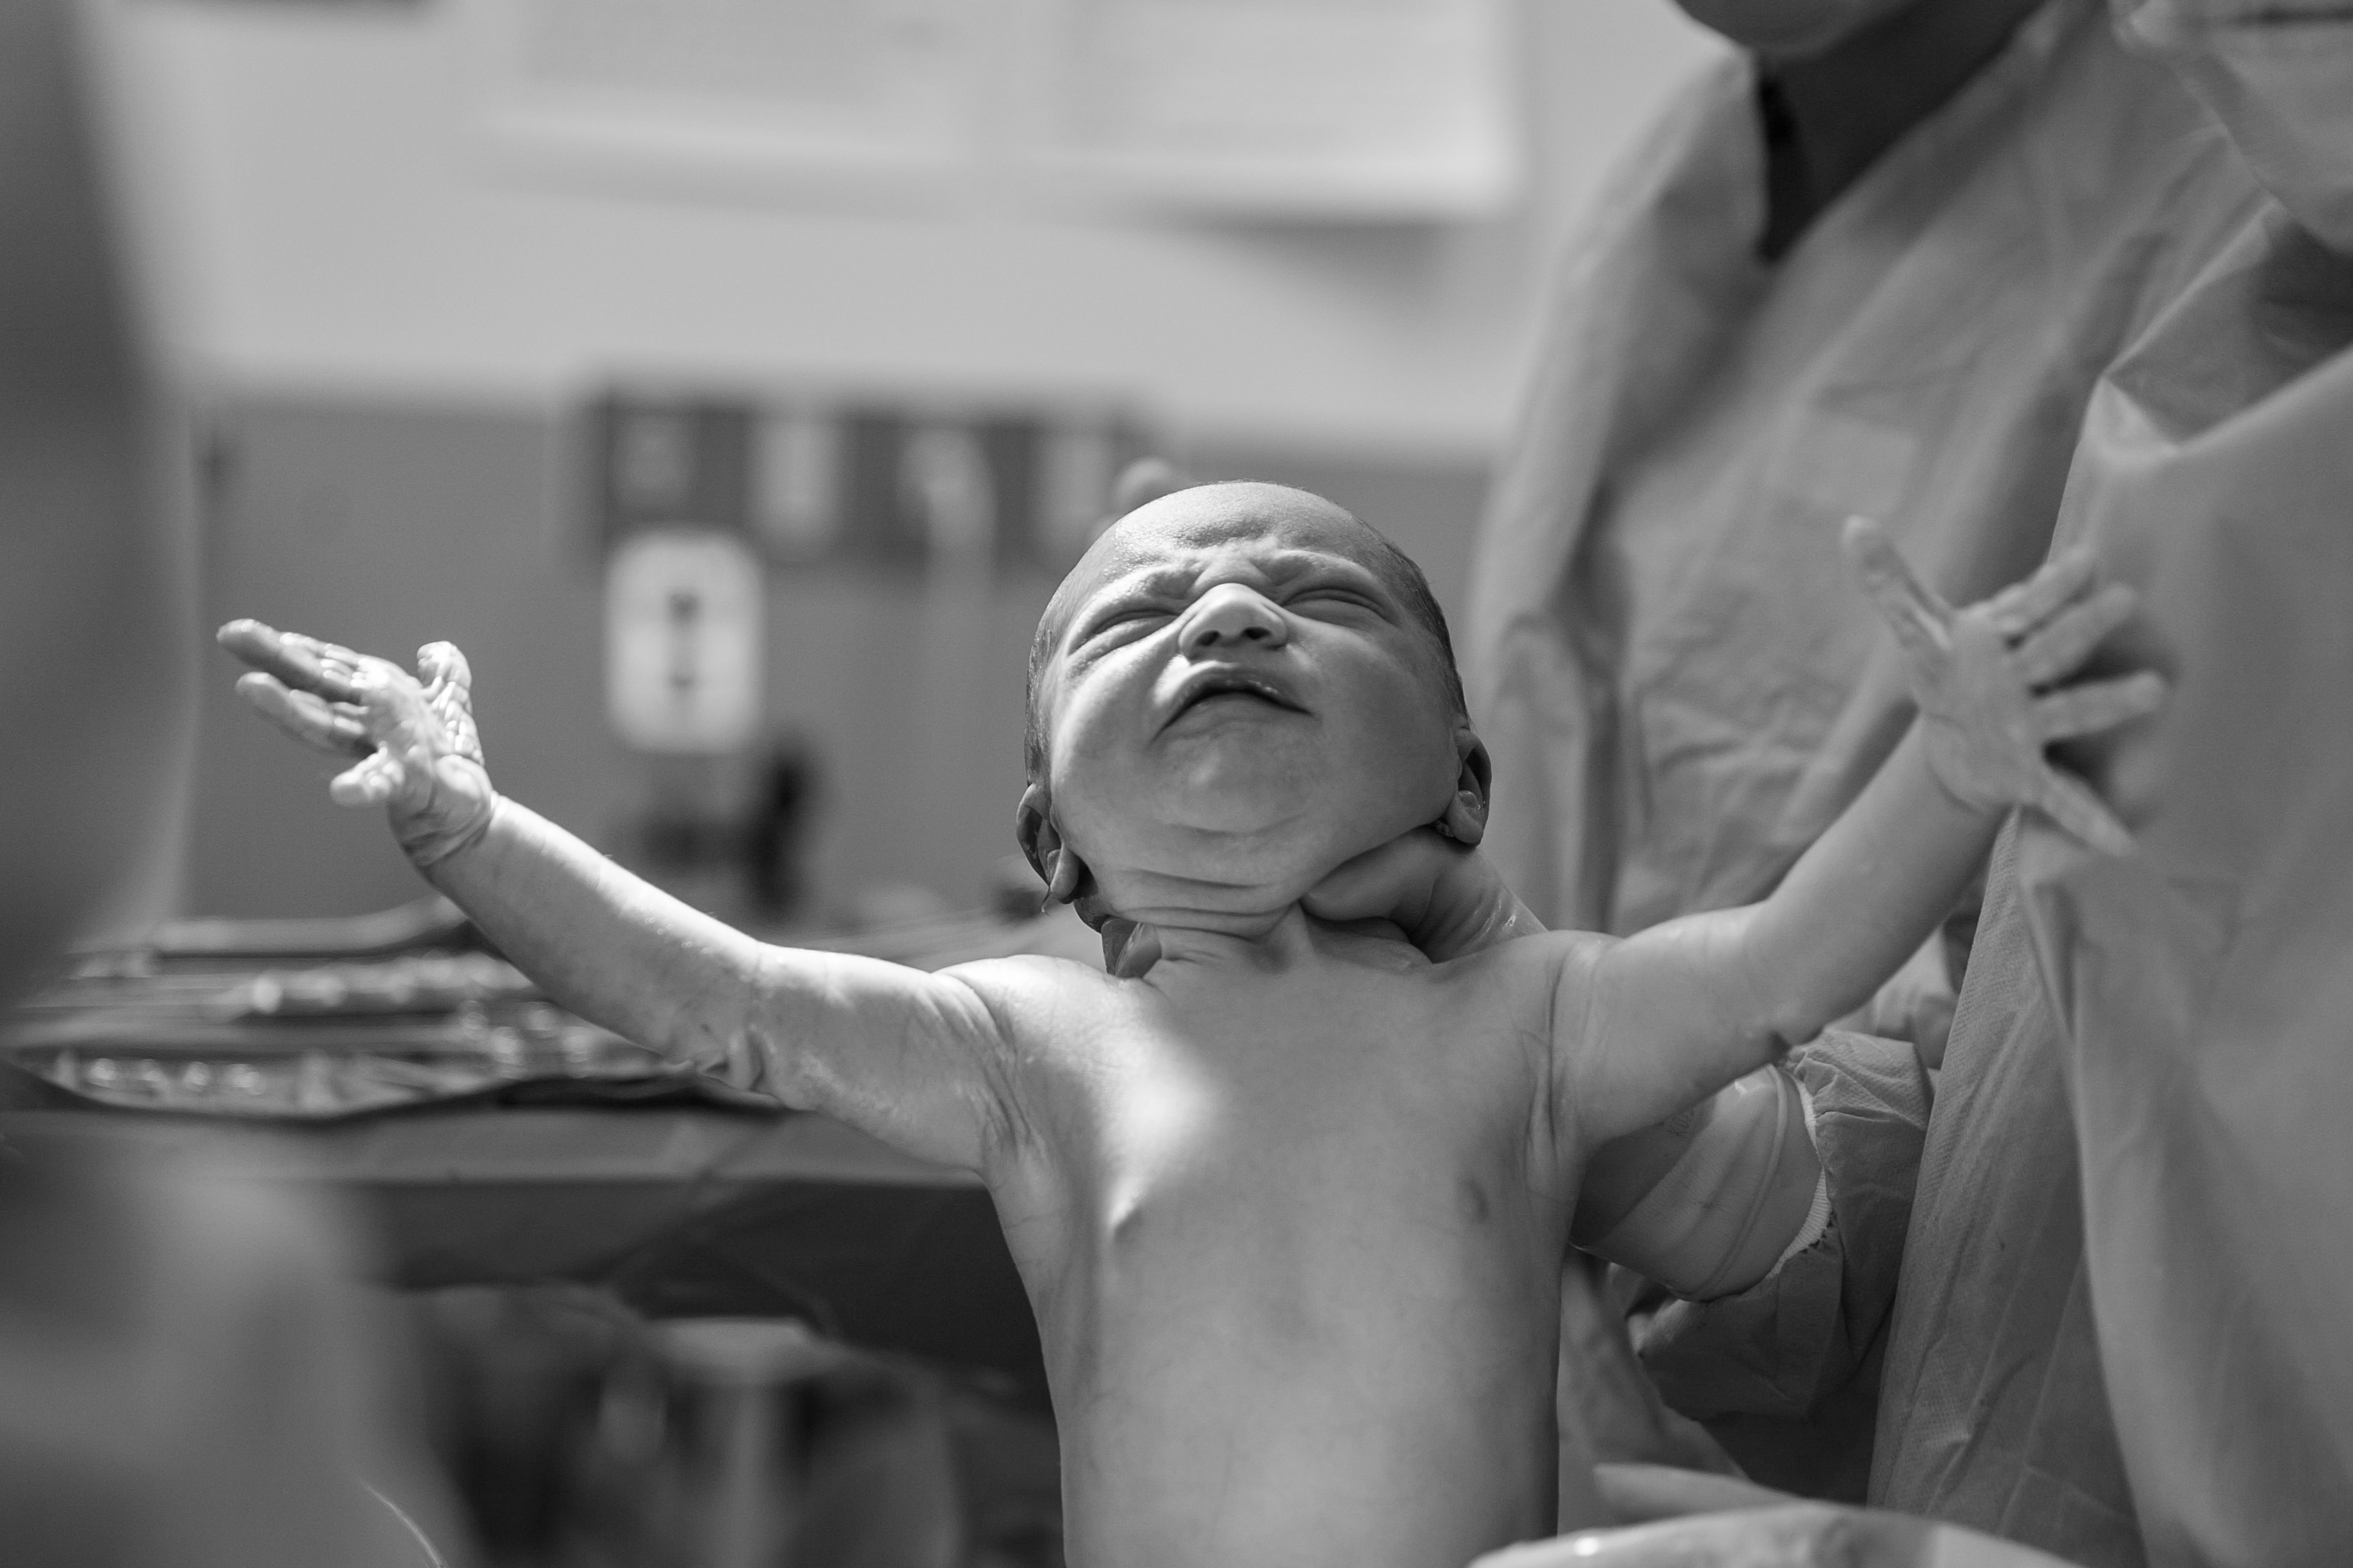 black & white image of a baby just being born, who is being held up by health care providers. Photo by Alex Hockett on Unsplash